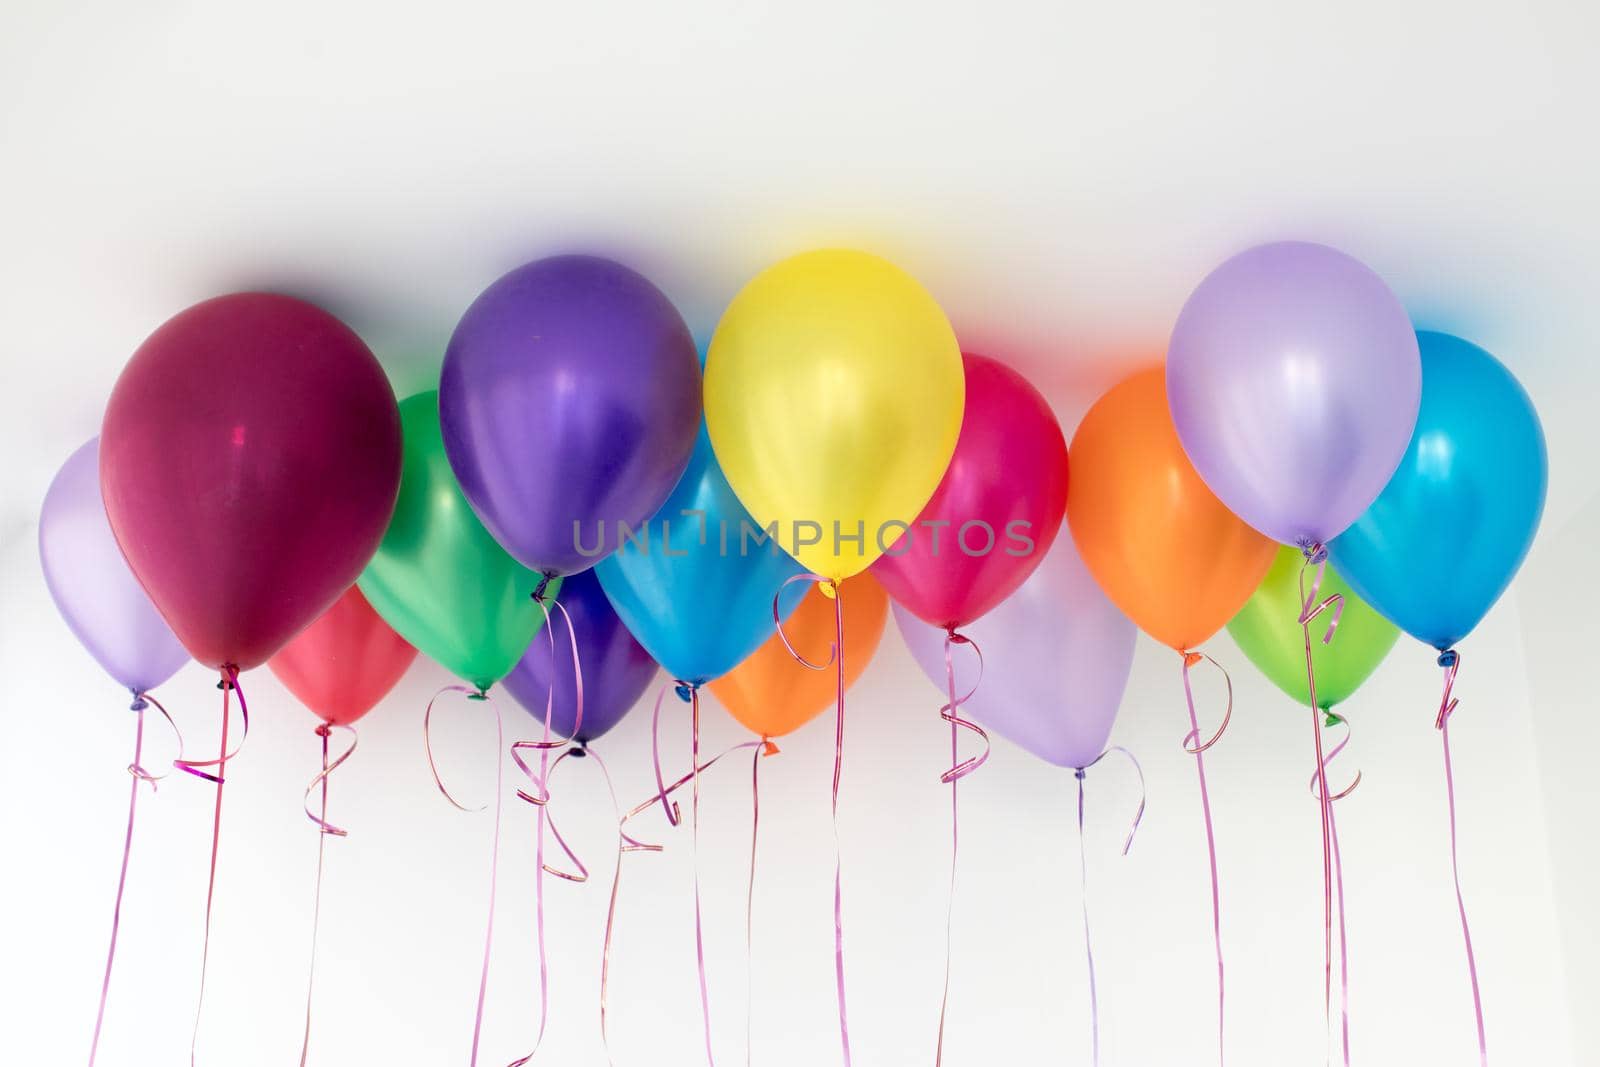 Bright colorful balloons under ceiling by Demkat